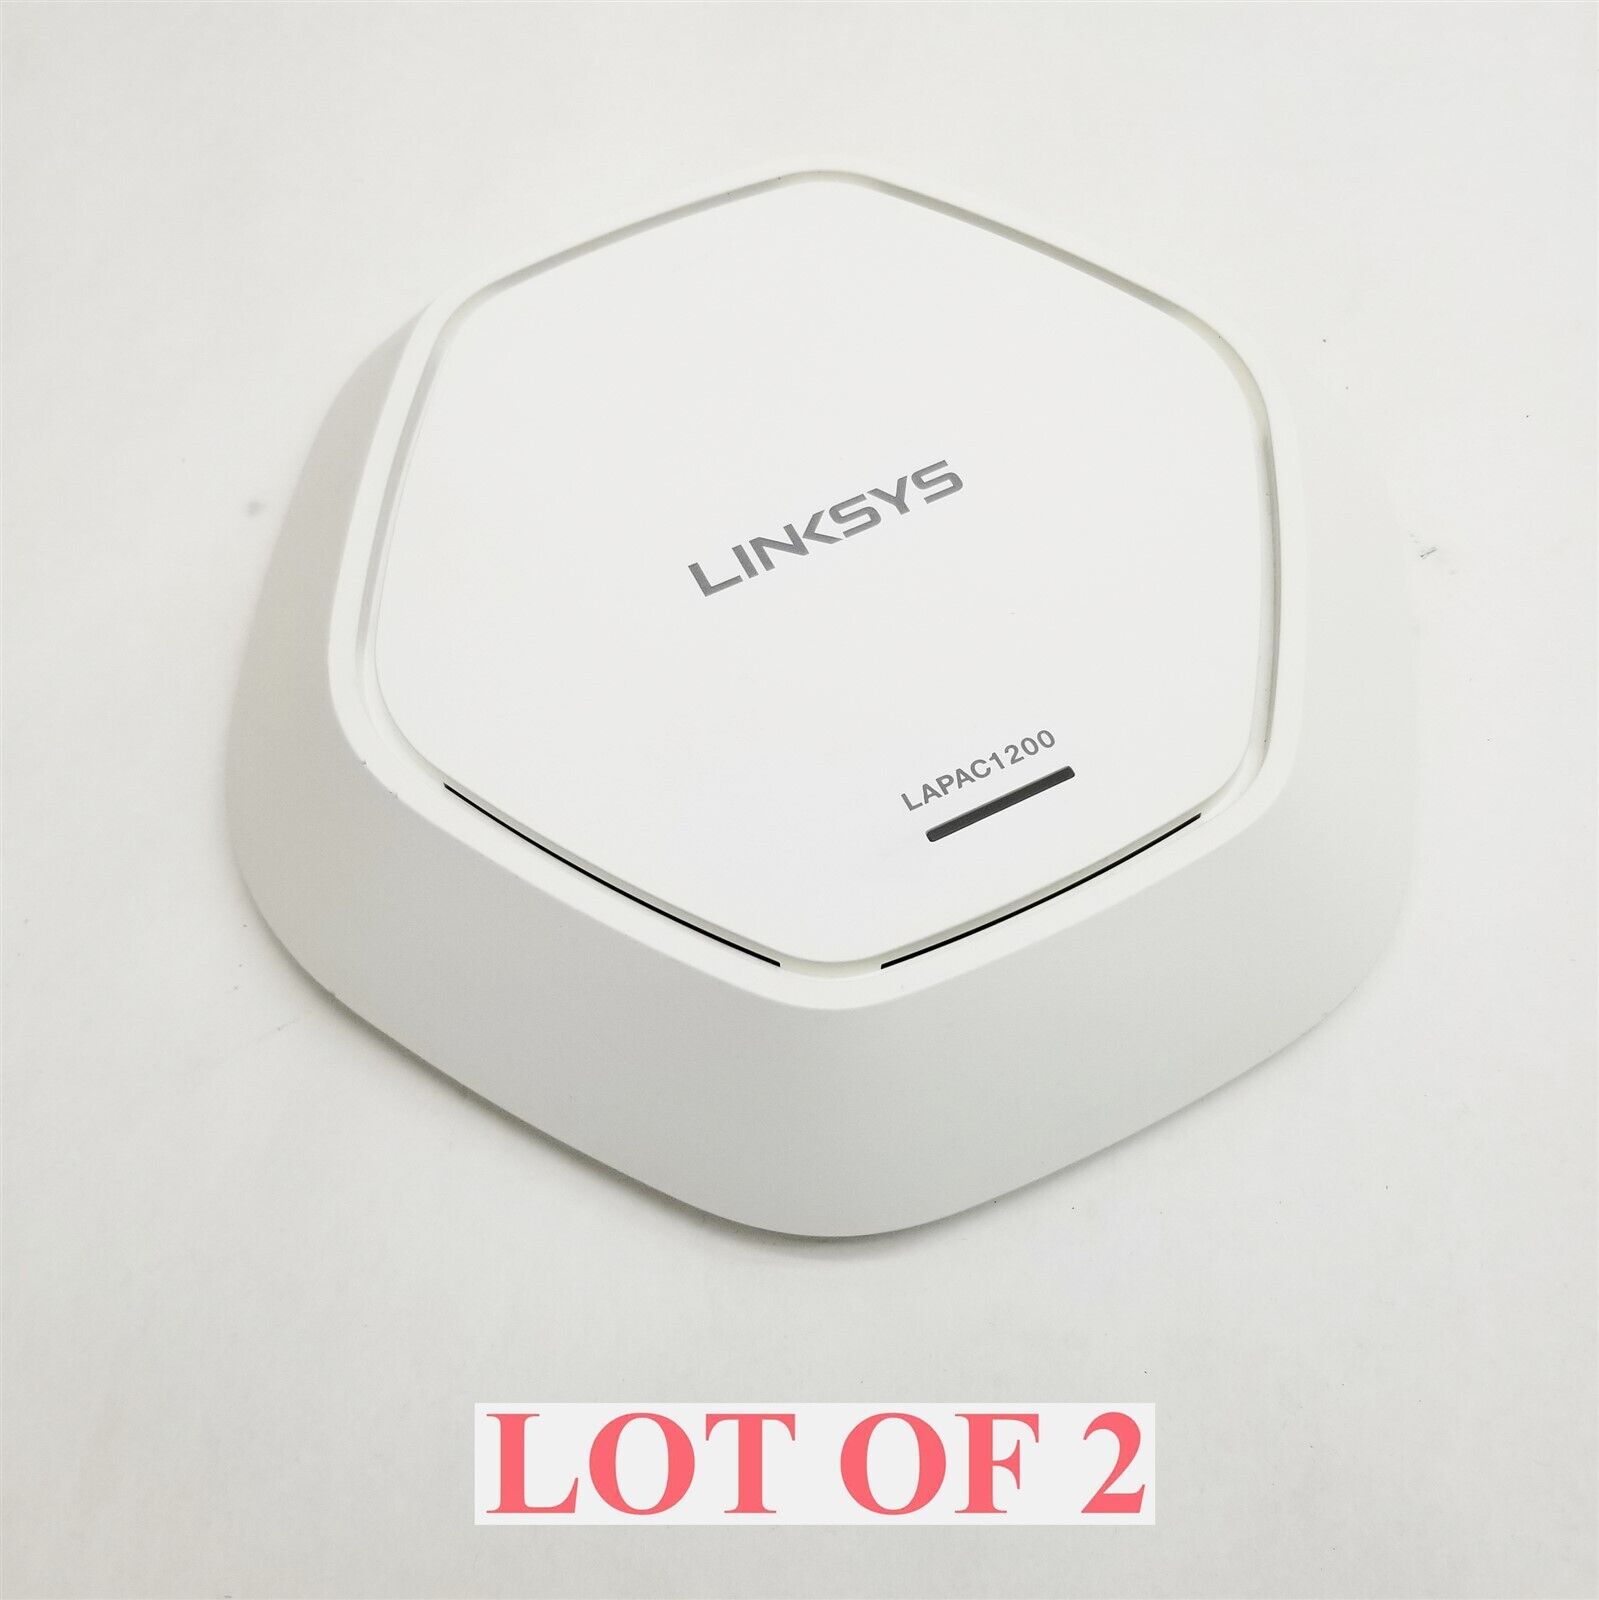 Linksys LAPAC1200 Business Wireless Access Point Dual-Band PoE AC1200 Lot 2